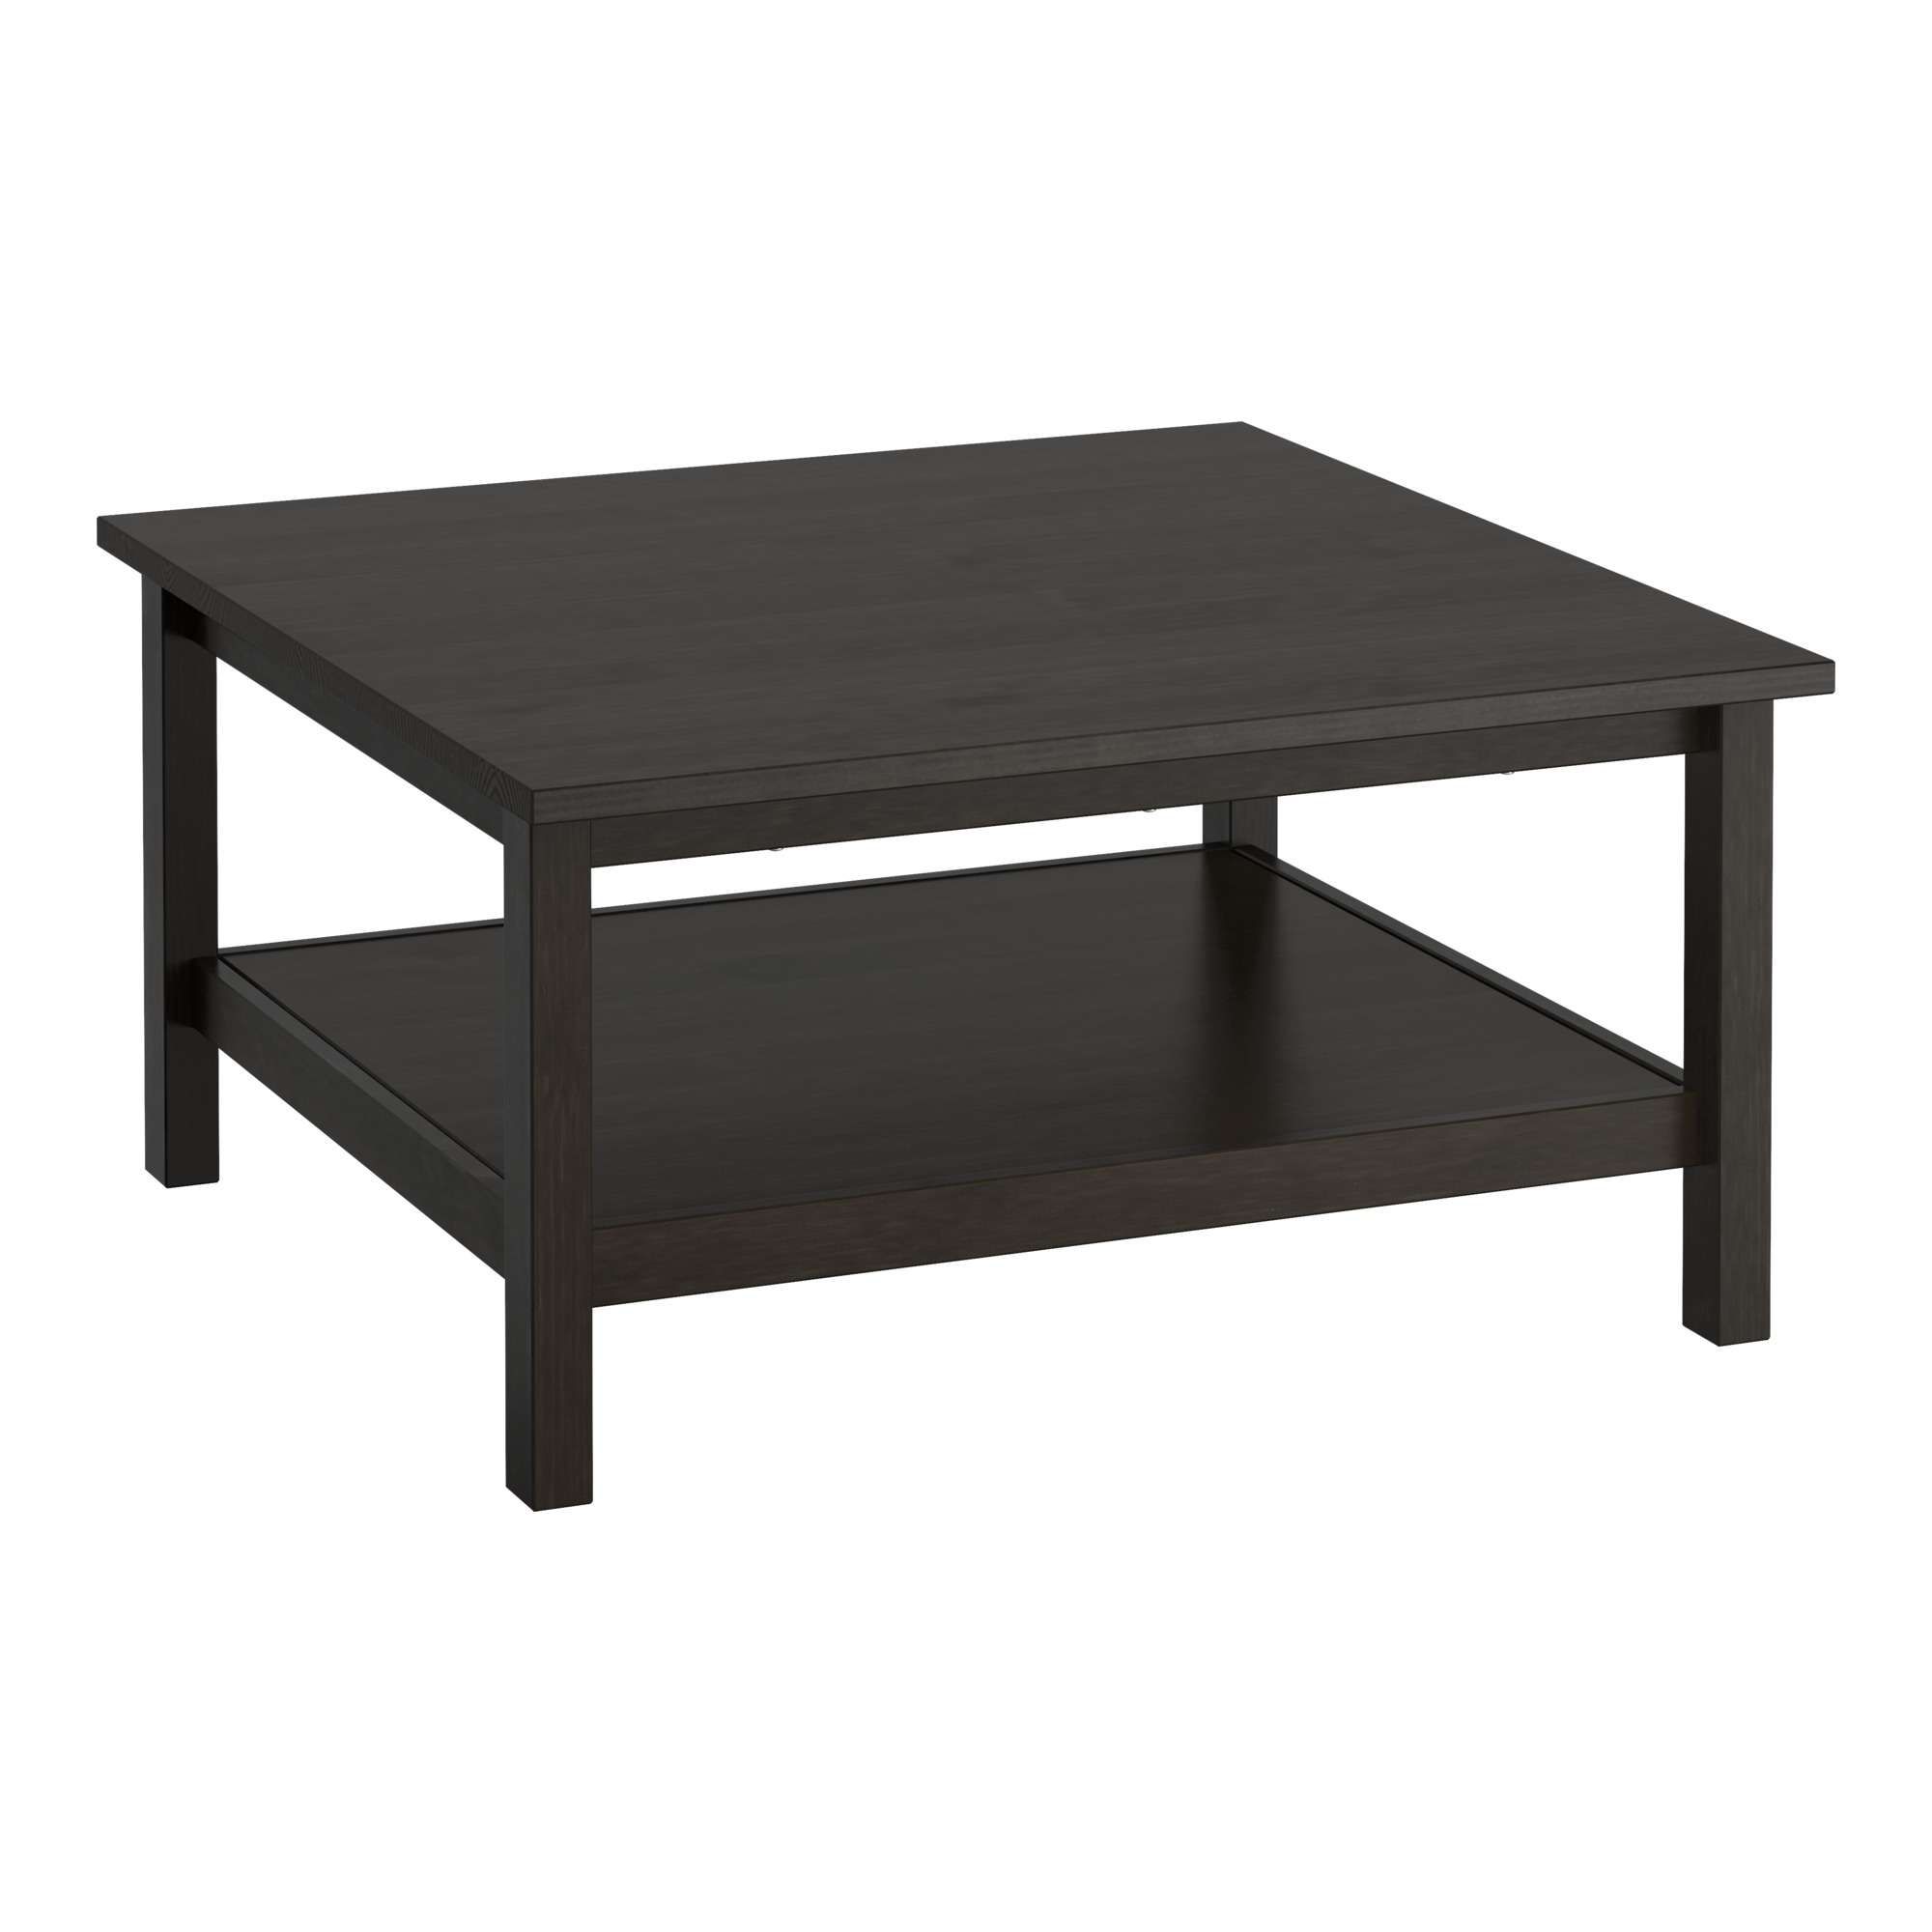 Coffee Tables – Glass & Wooden Coffee Tables – Ikea Throughout Well Known Glass And Black Coffee Tables (View 10 of 20)